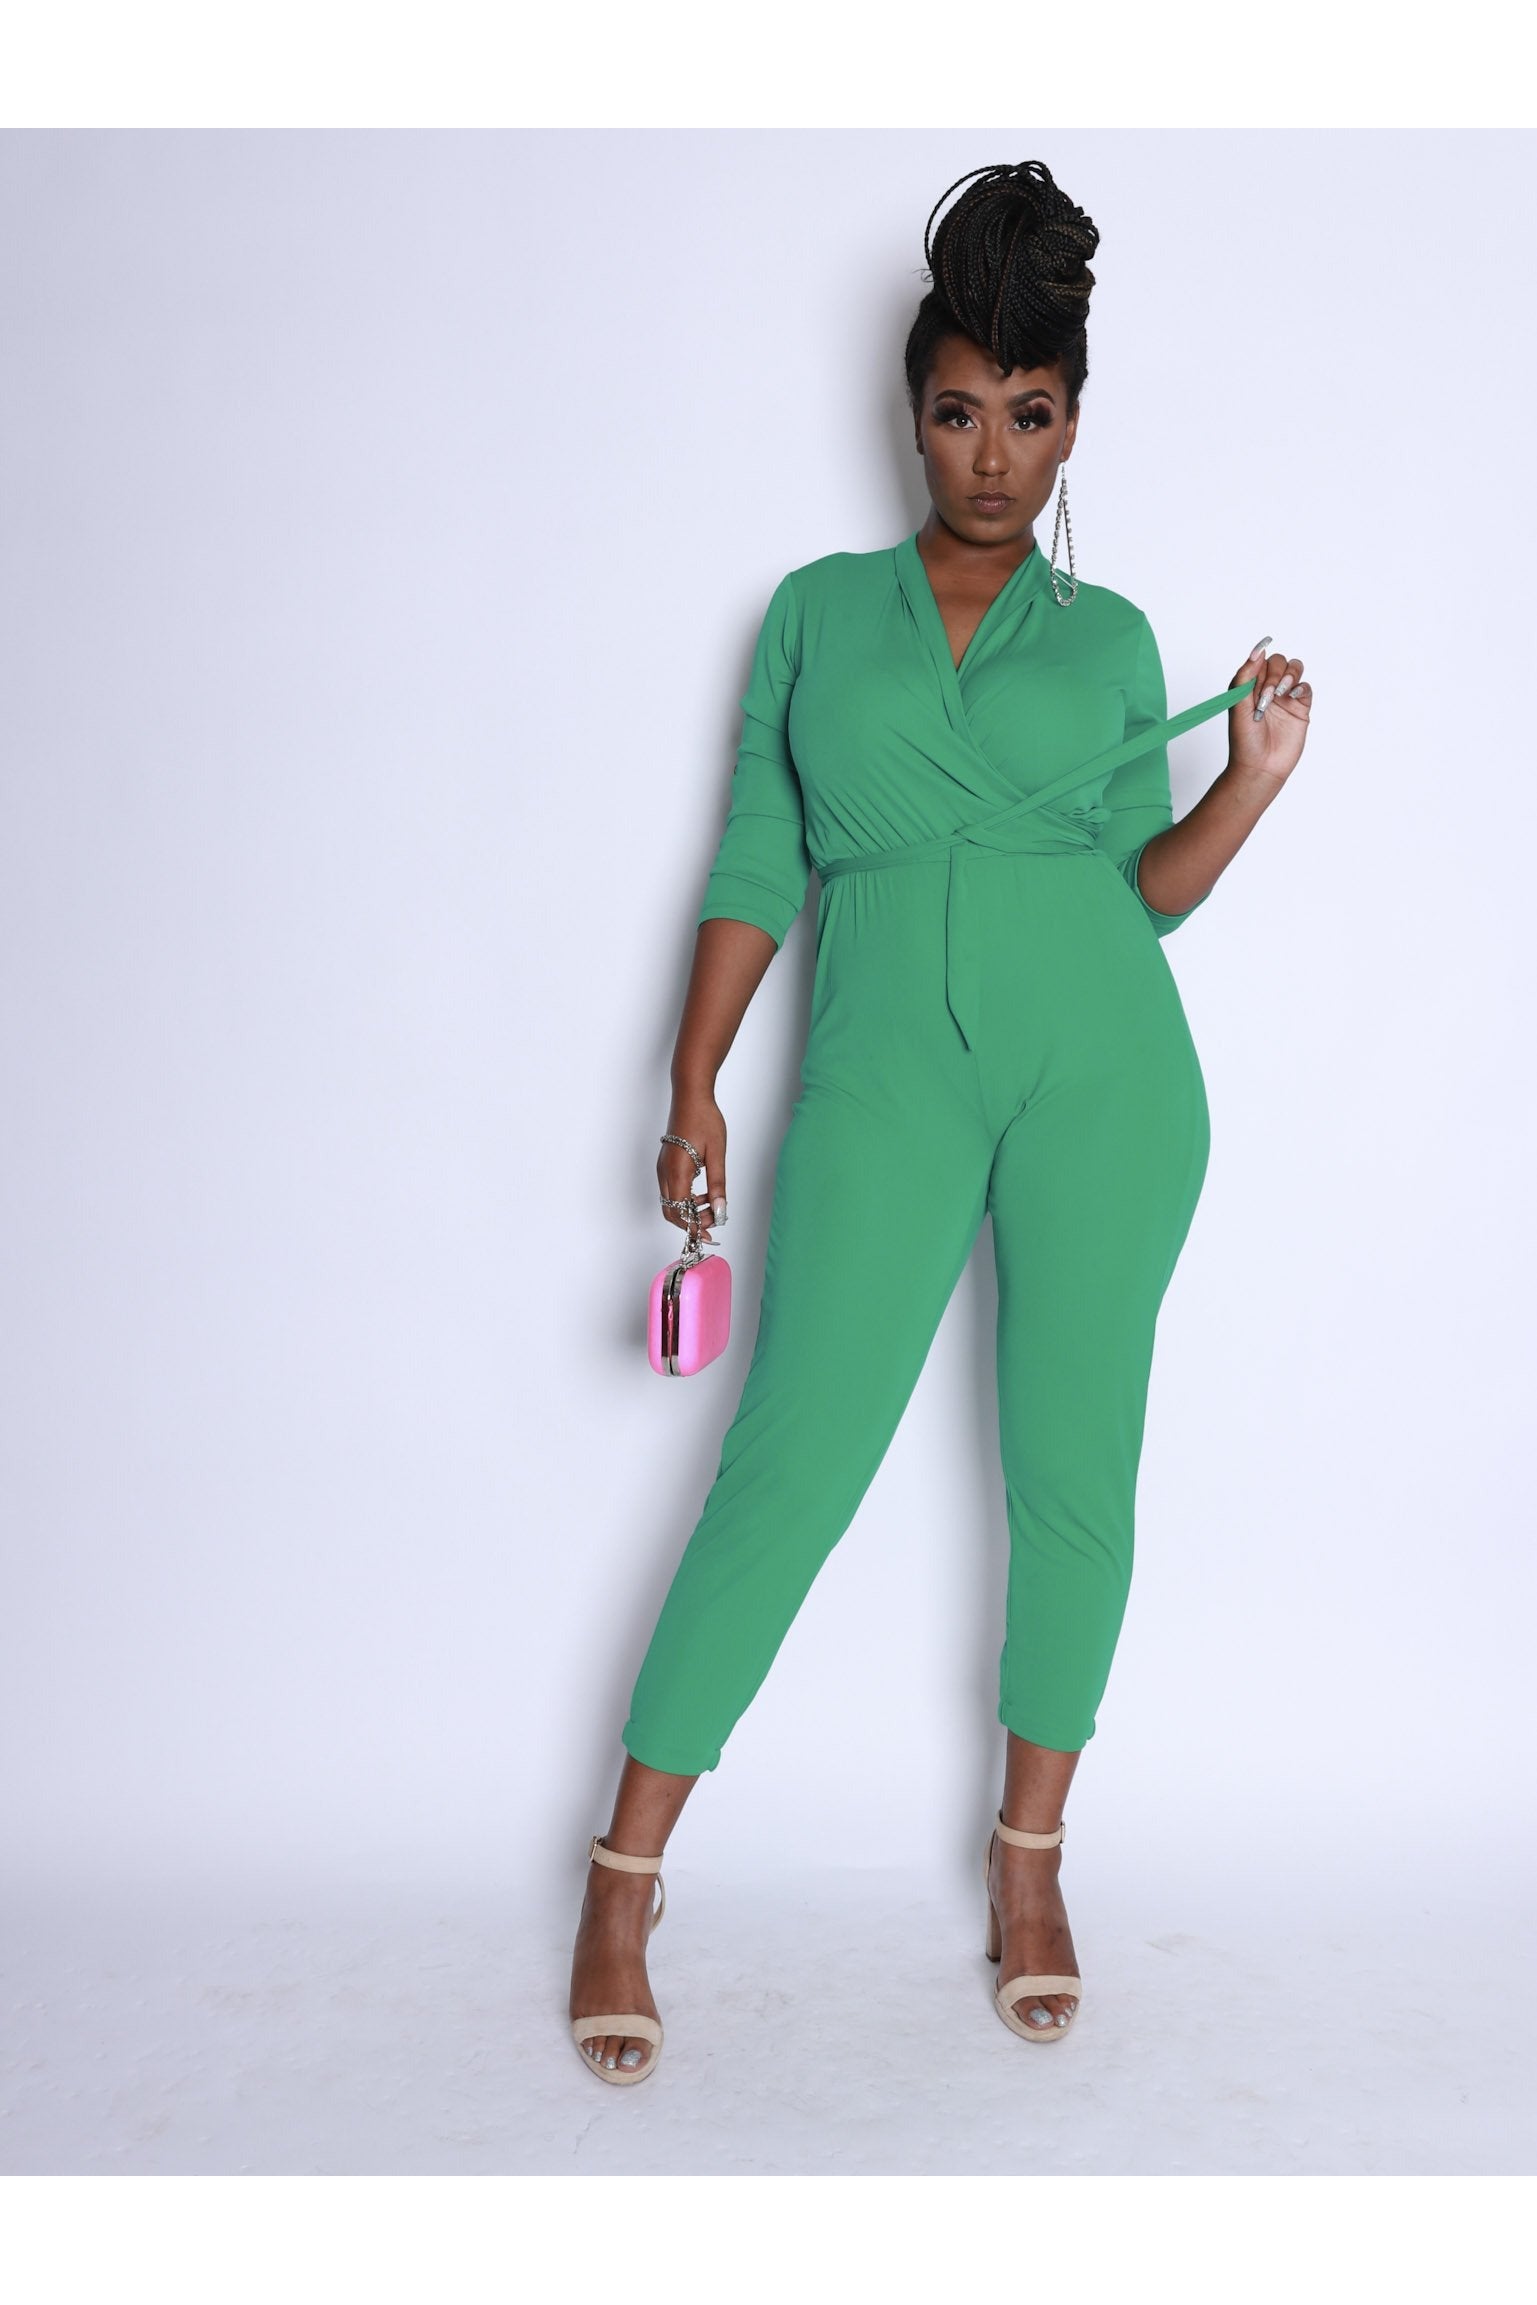 Kelly Green Jumpsuit - Light Weight Comfortable Bottoms - 227 Boutique